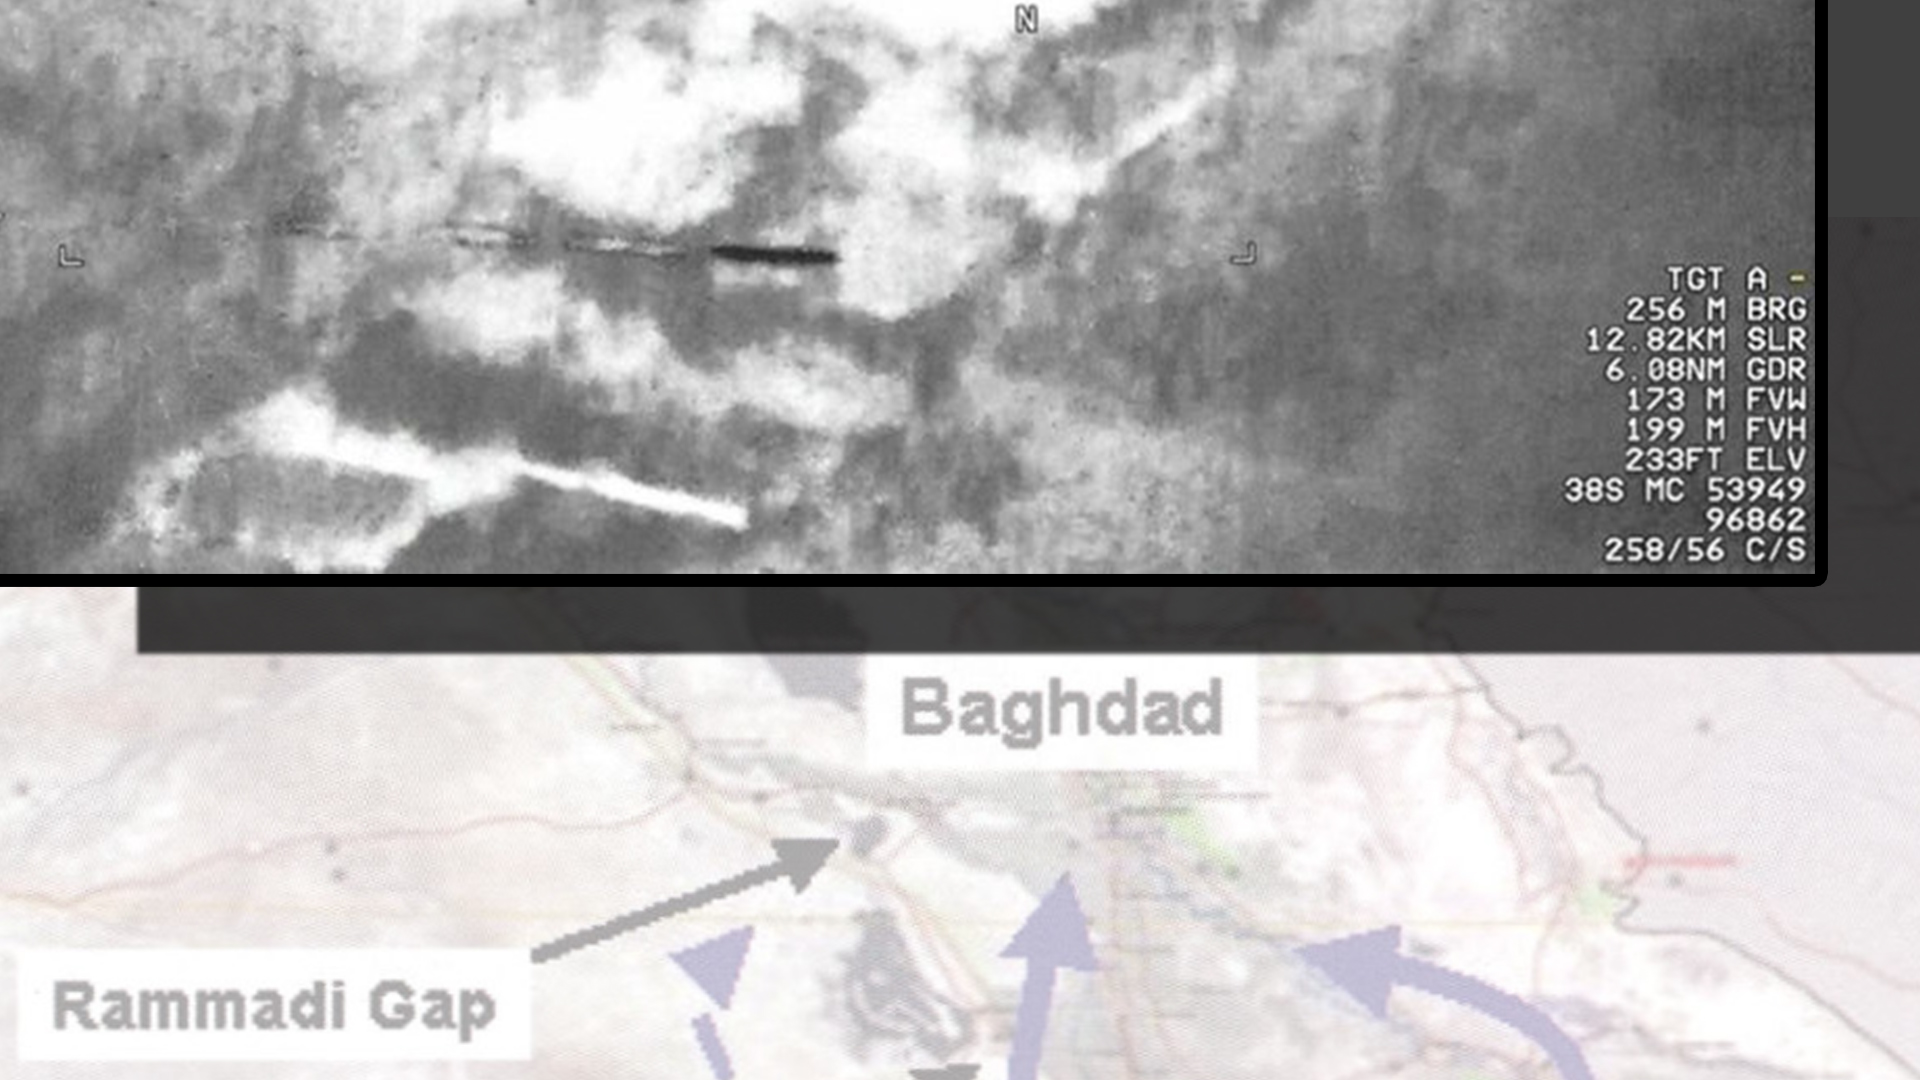 The “Baghdad Phantom UAP” Imagery Published by Jeremy Corbell & George Knapp